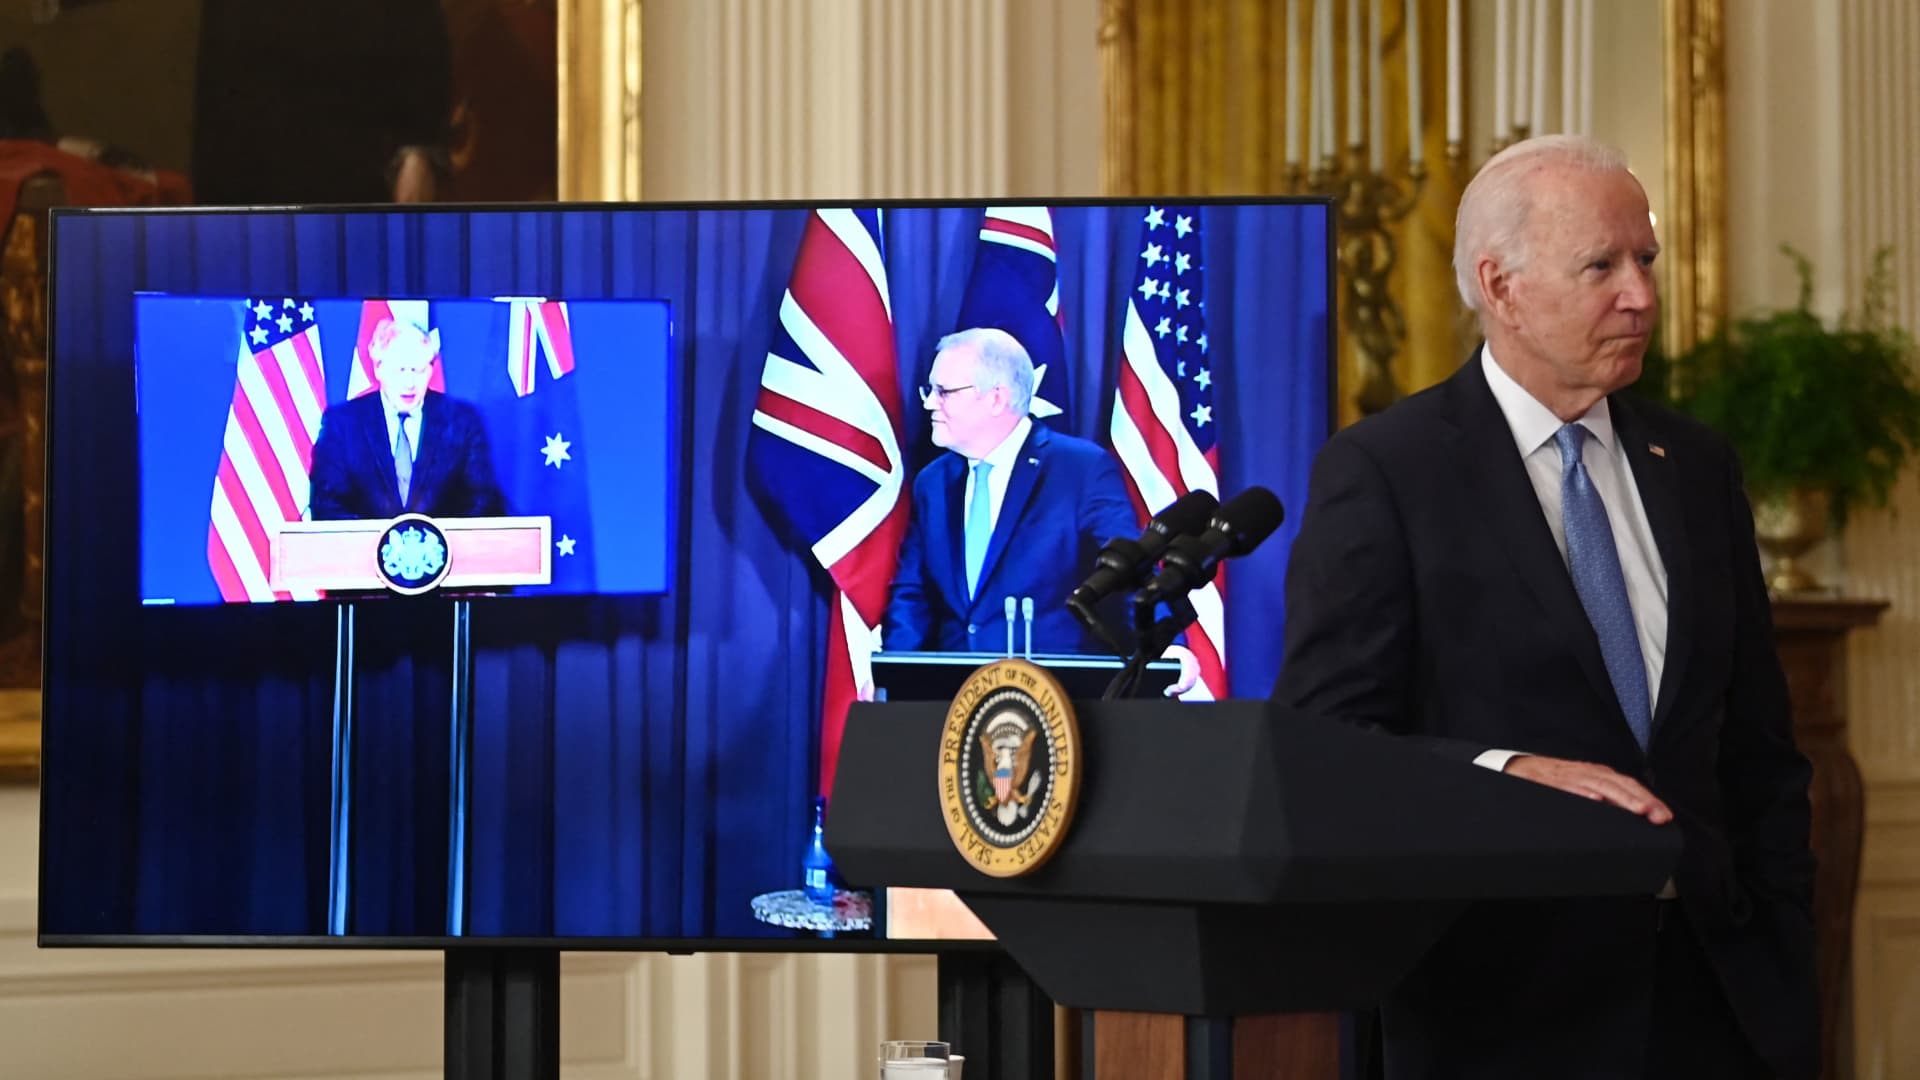 US President Joe Biden participates is a virtual press conference on national security with British Prime Minister Boris Johnson and Australian Prime Minister Scott Morrison in the East Room of the White House in Washington, DC, on September 15, 2021.